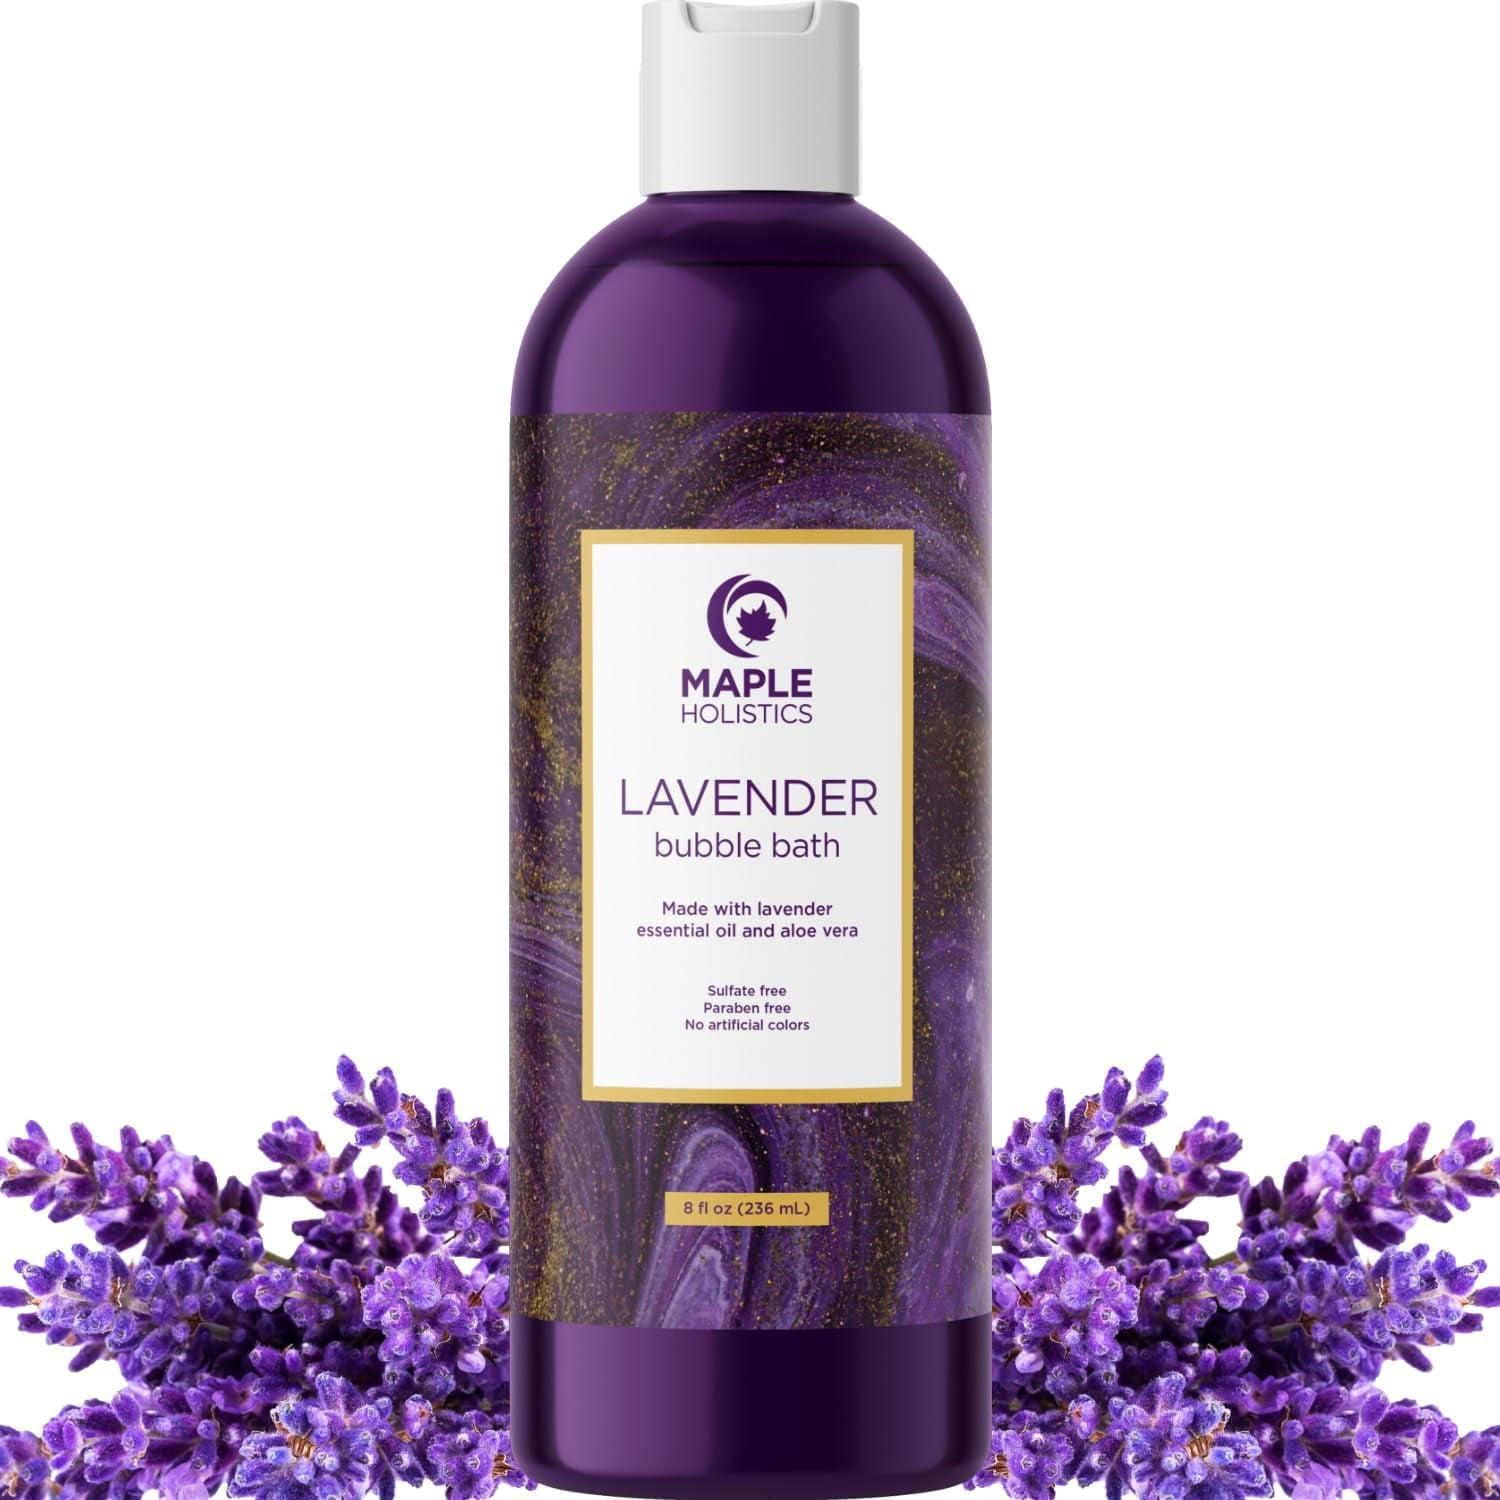 Lavender Bubble Bath for Kids with Aloe - Sudsy Bubble Bath with  Aromatherapy Essential Oils for Relaxing and Lavender Oil Baby Bath Wash -  Kids Bath Enriched with Nourishing Aloe Vera and